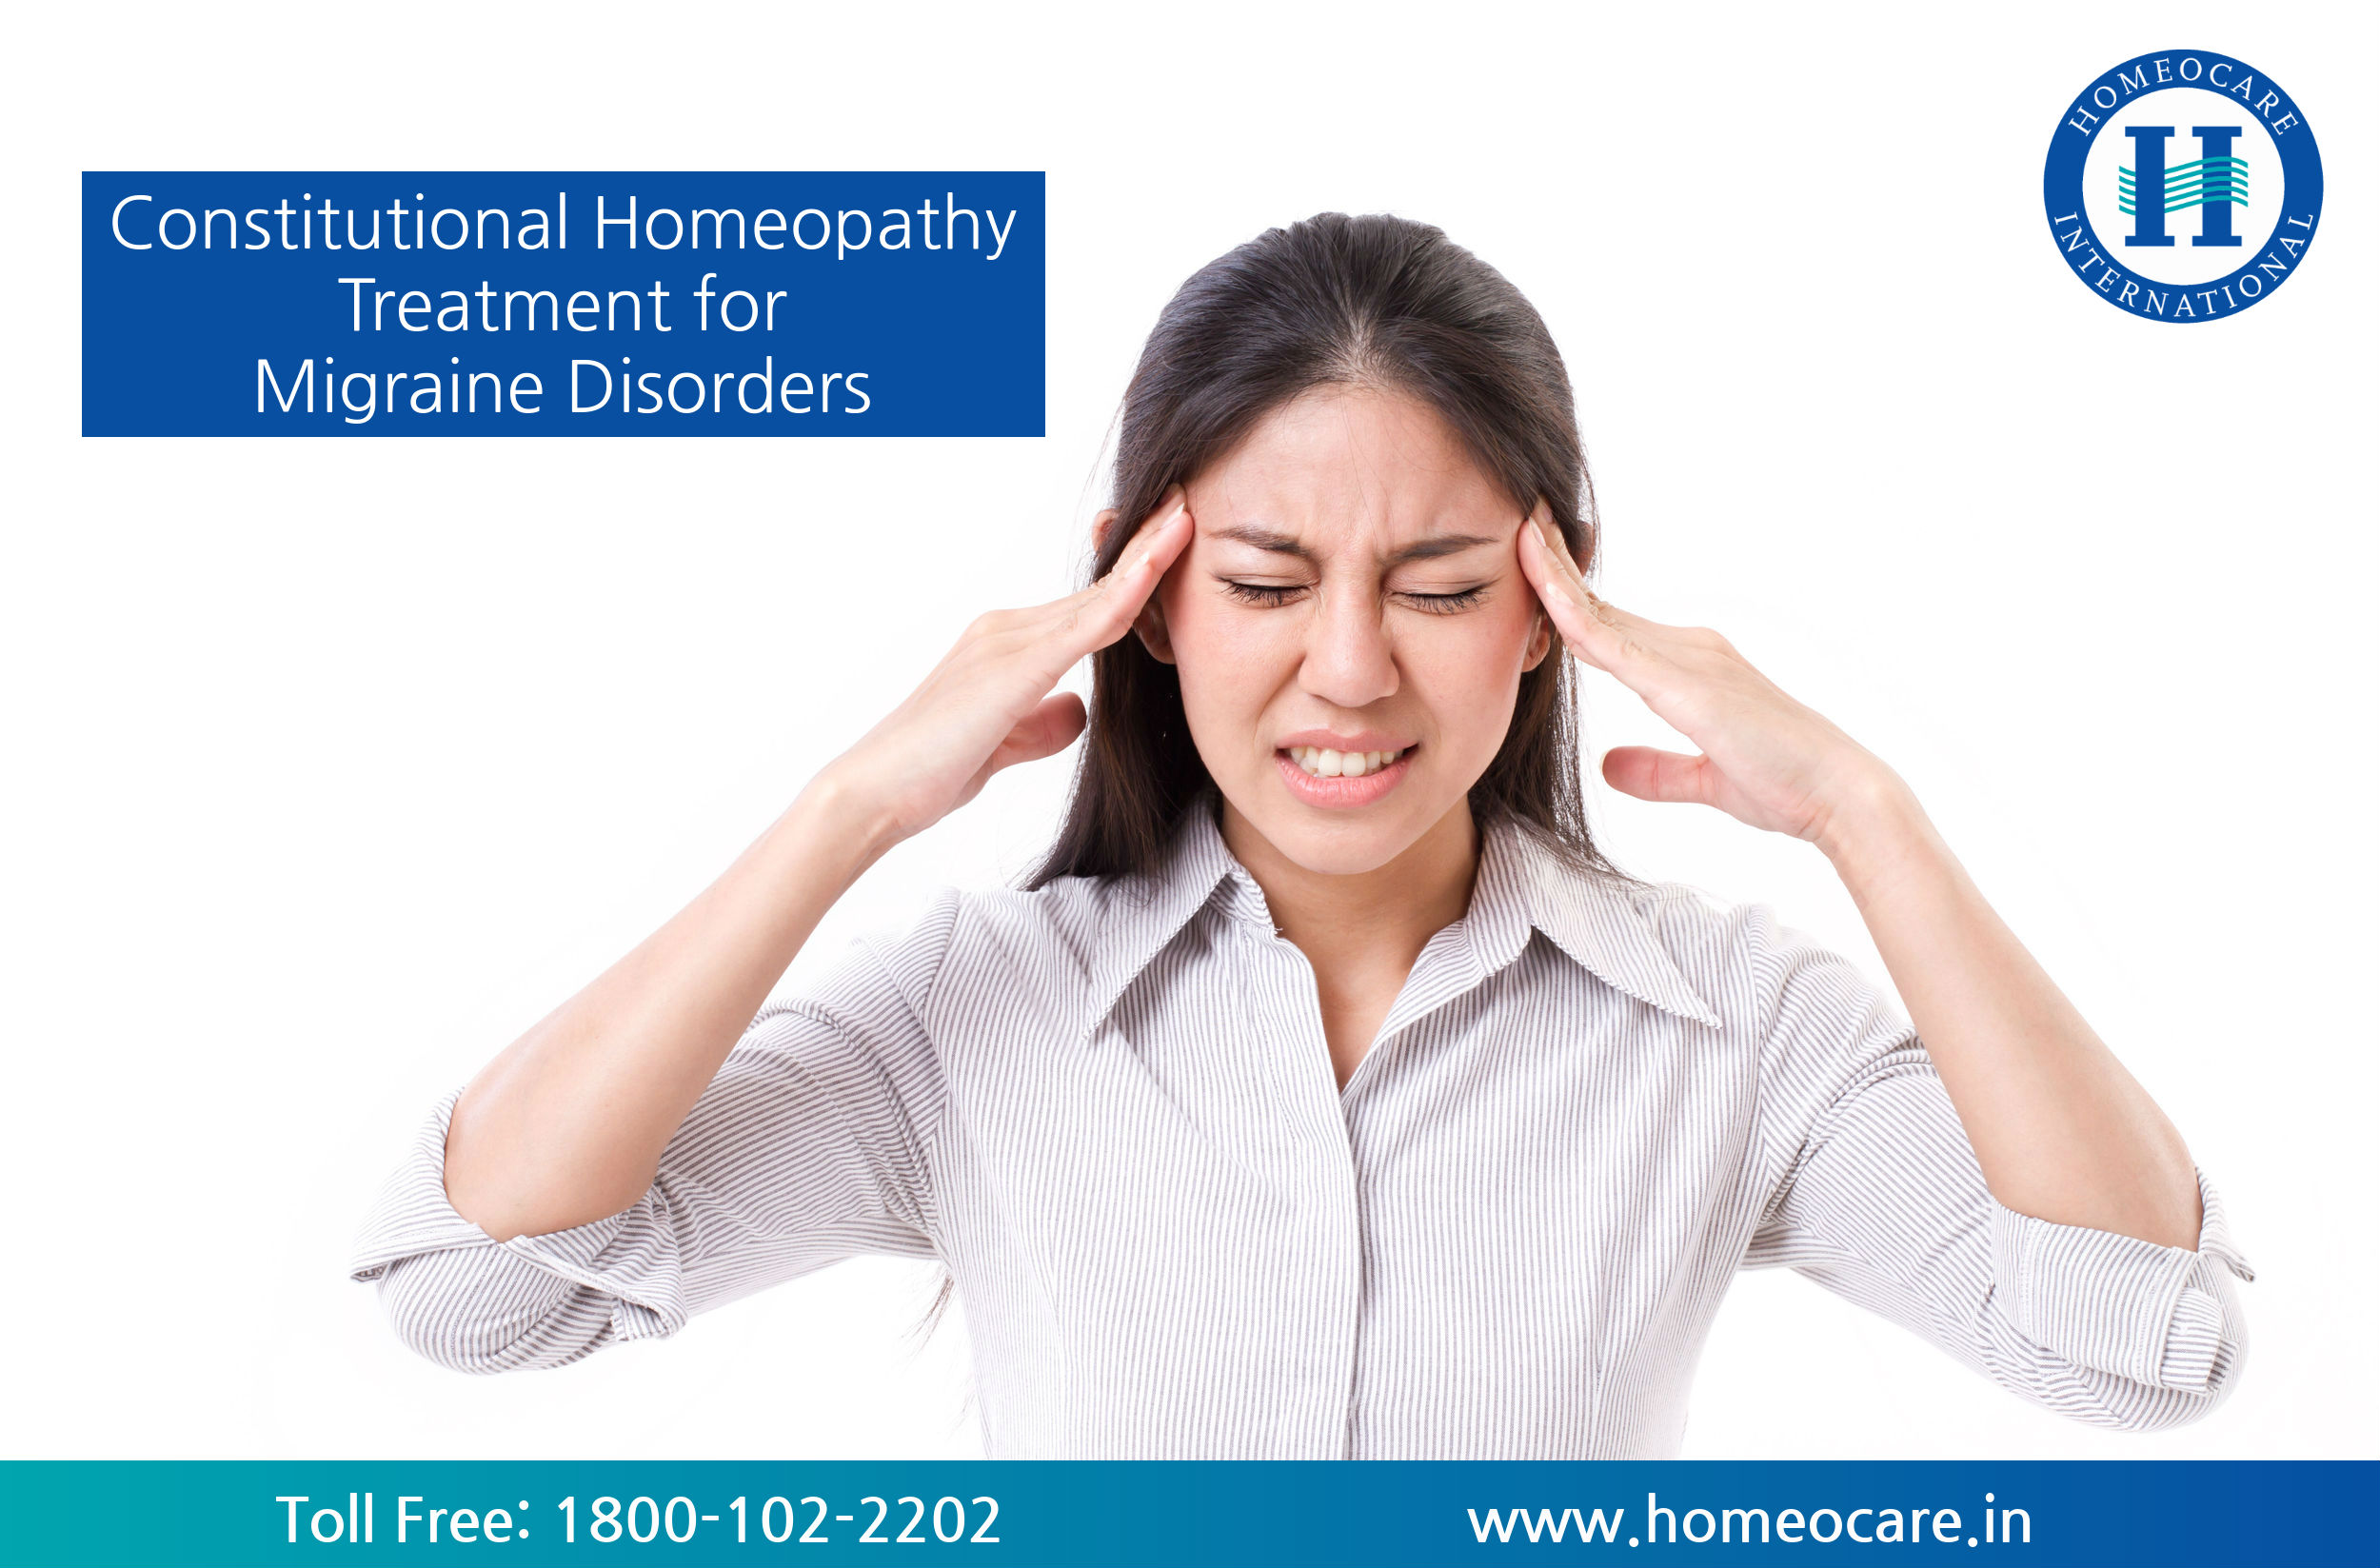 Constitutional Homeopathy Treatment for Migraine Disorders